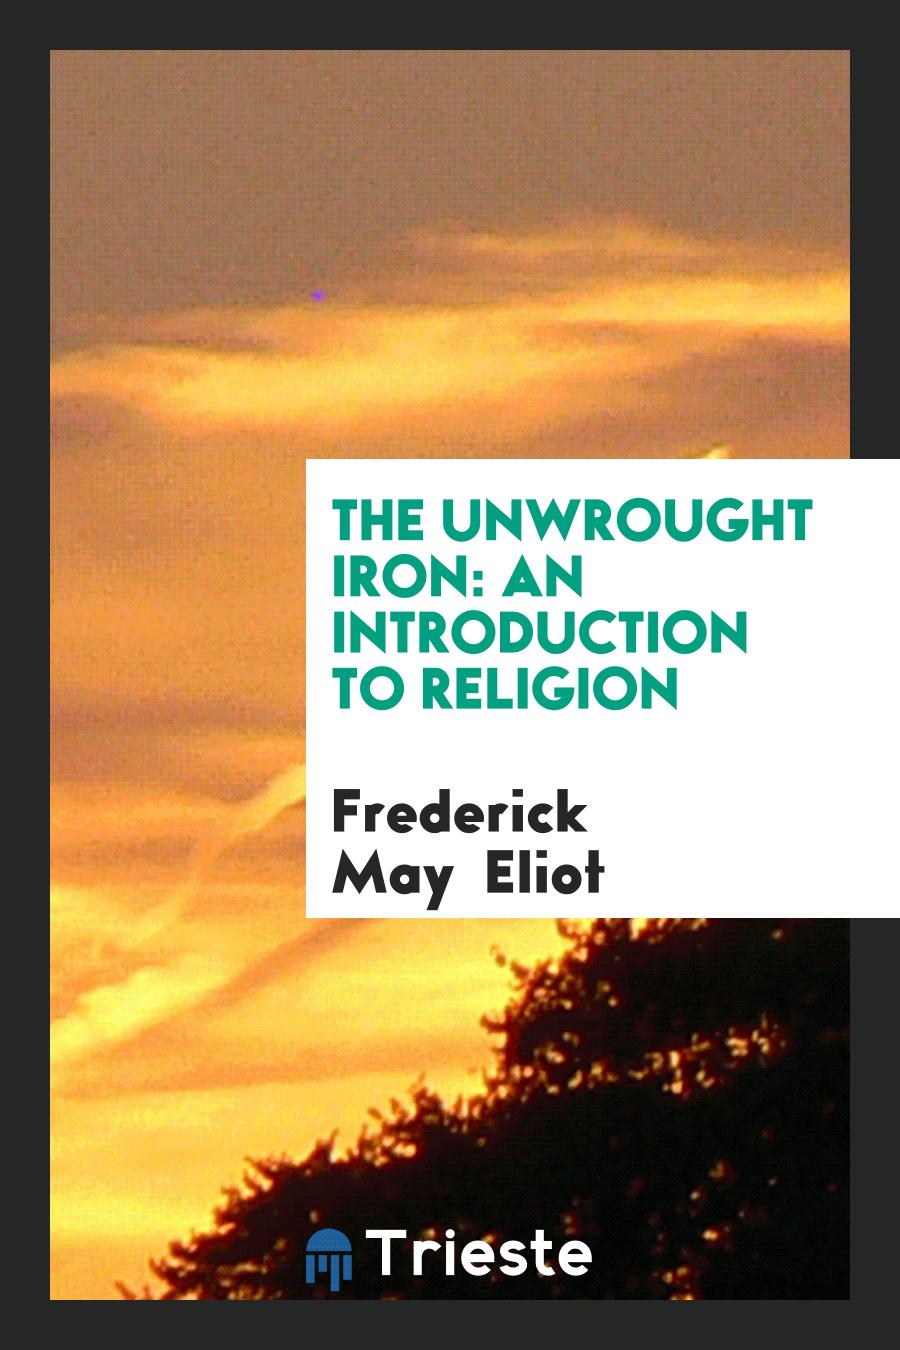 The Unwrought Iron: An Introduction to Religion